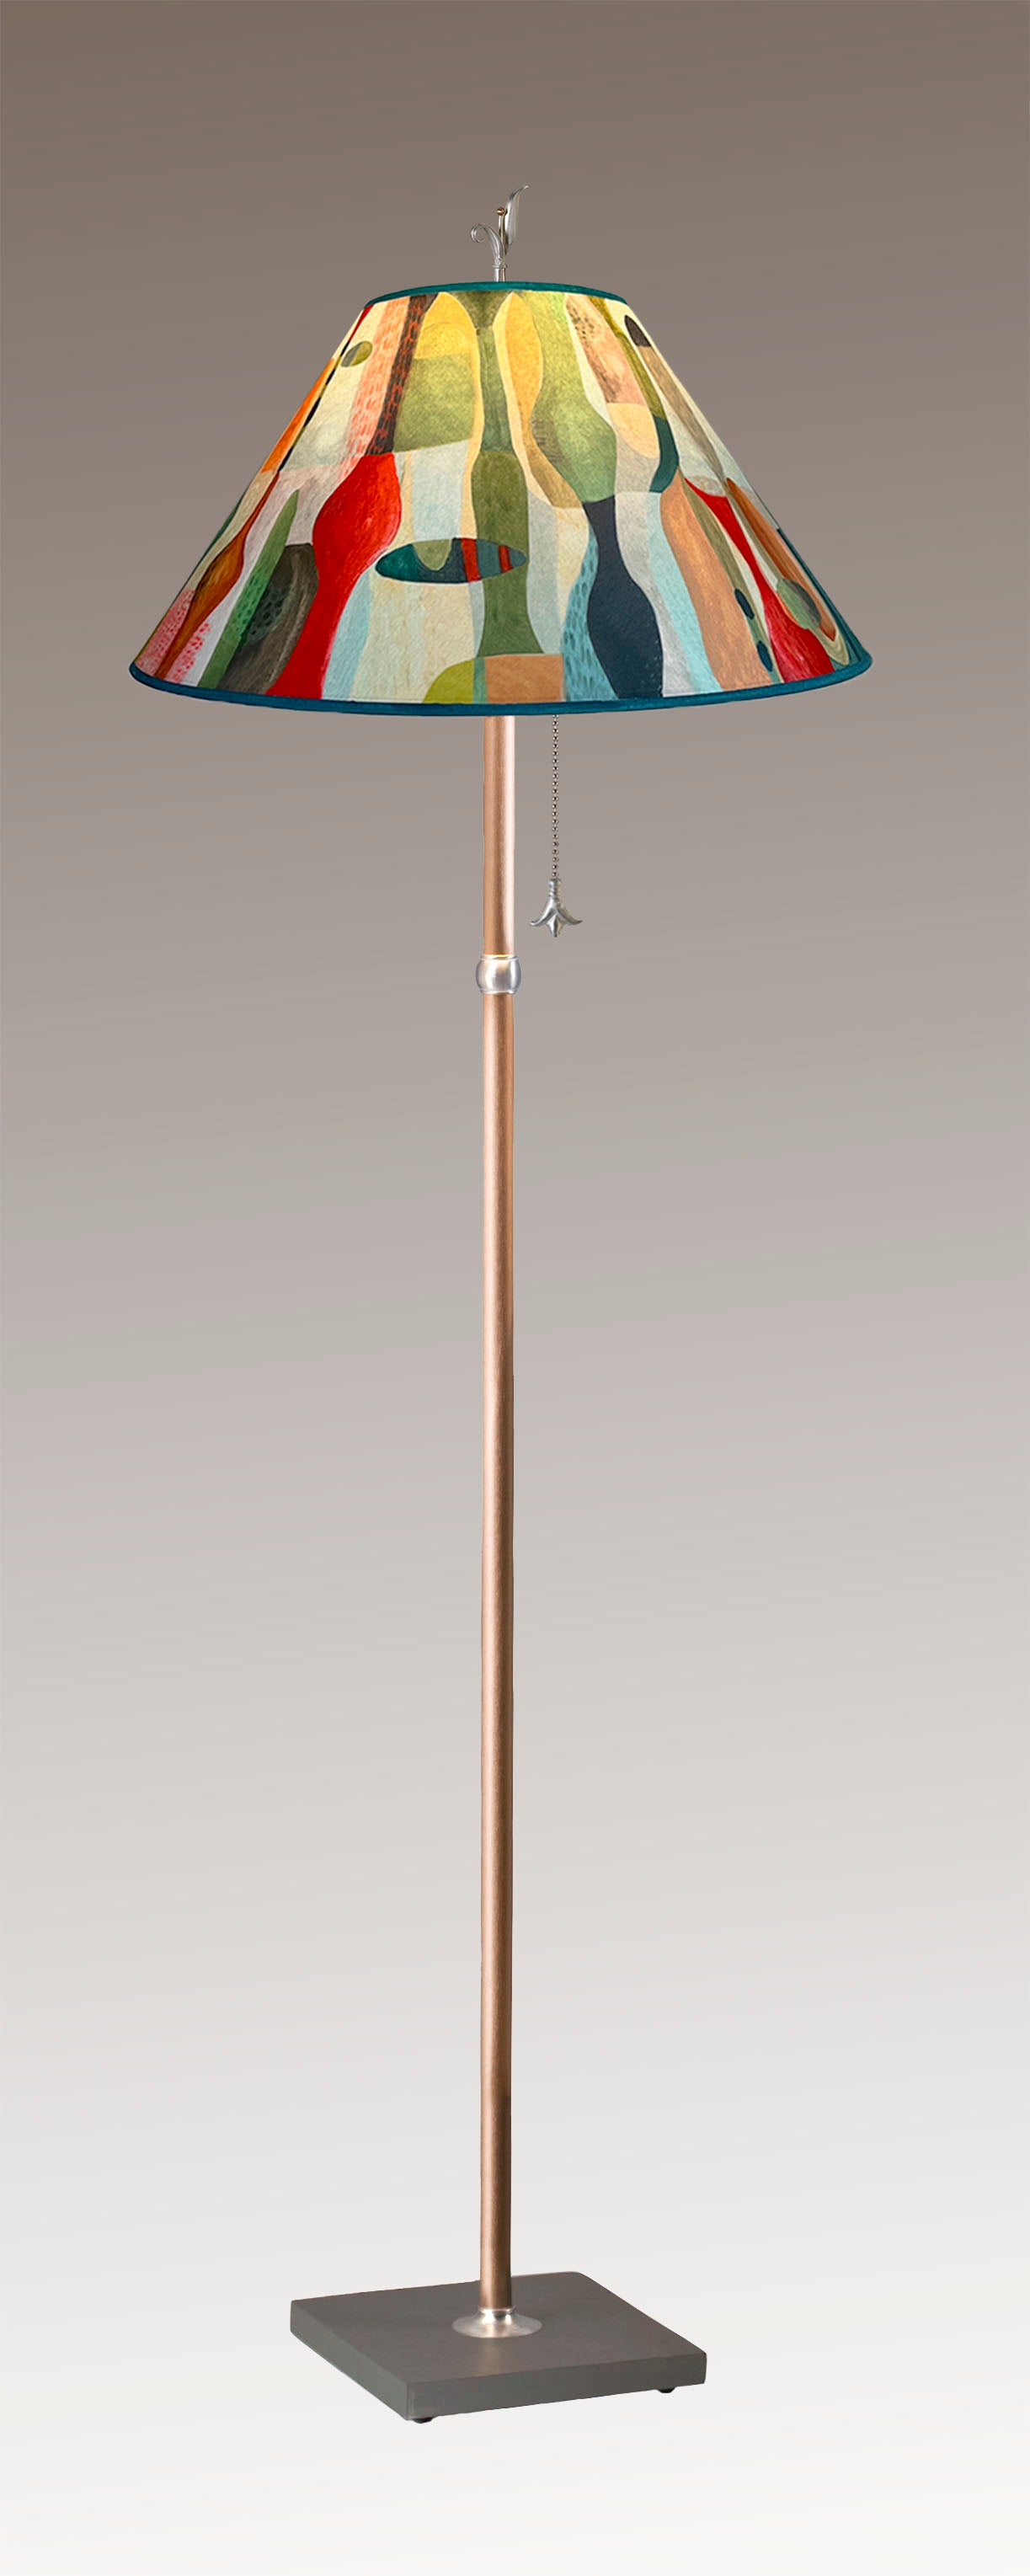 Janna Ugone & Co Floor Lamp Copper Floor Lamp with Large Conical Shade in Riviera in Poppy